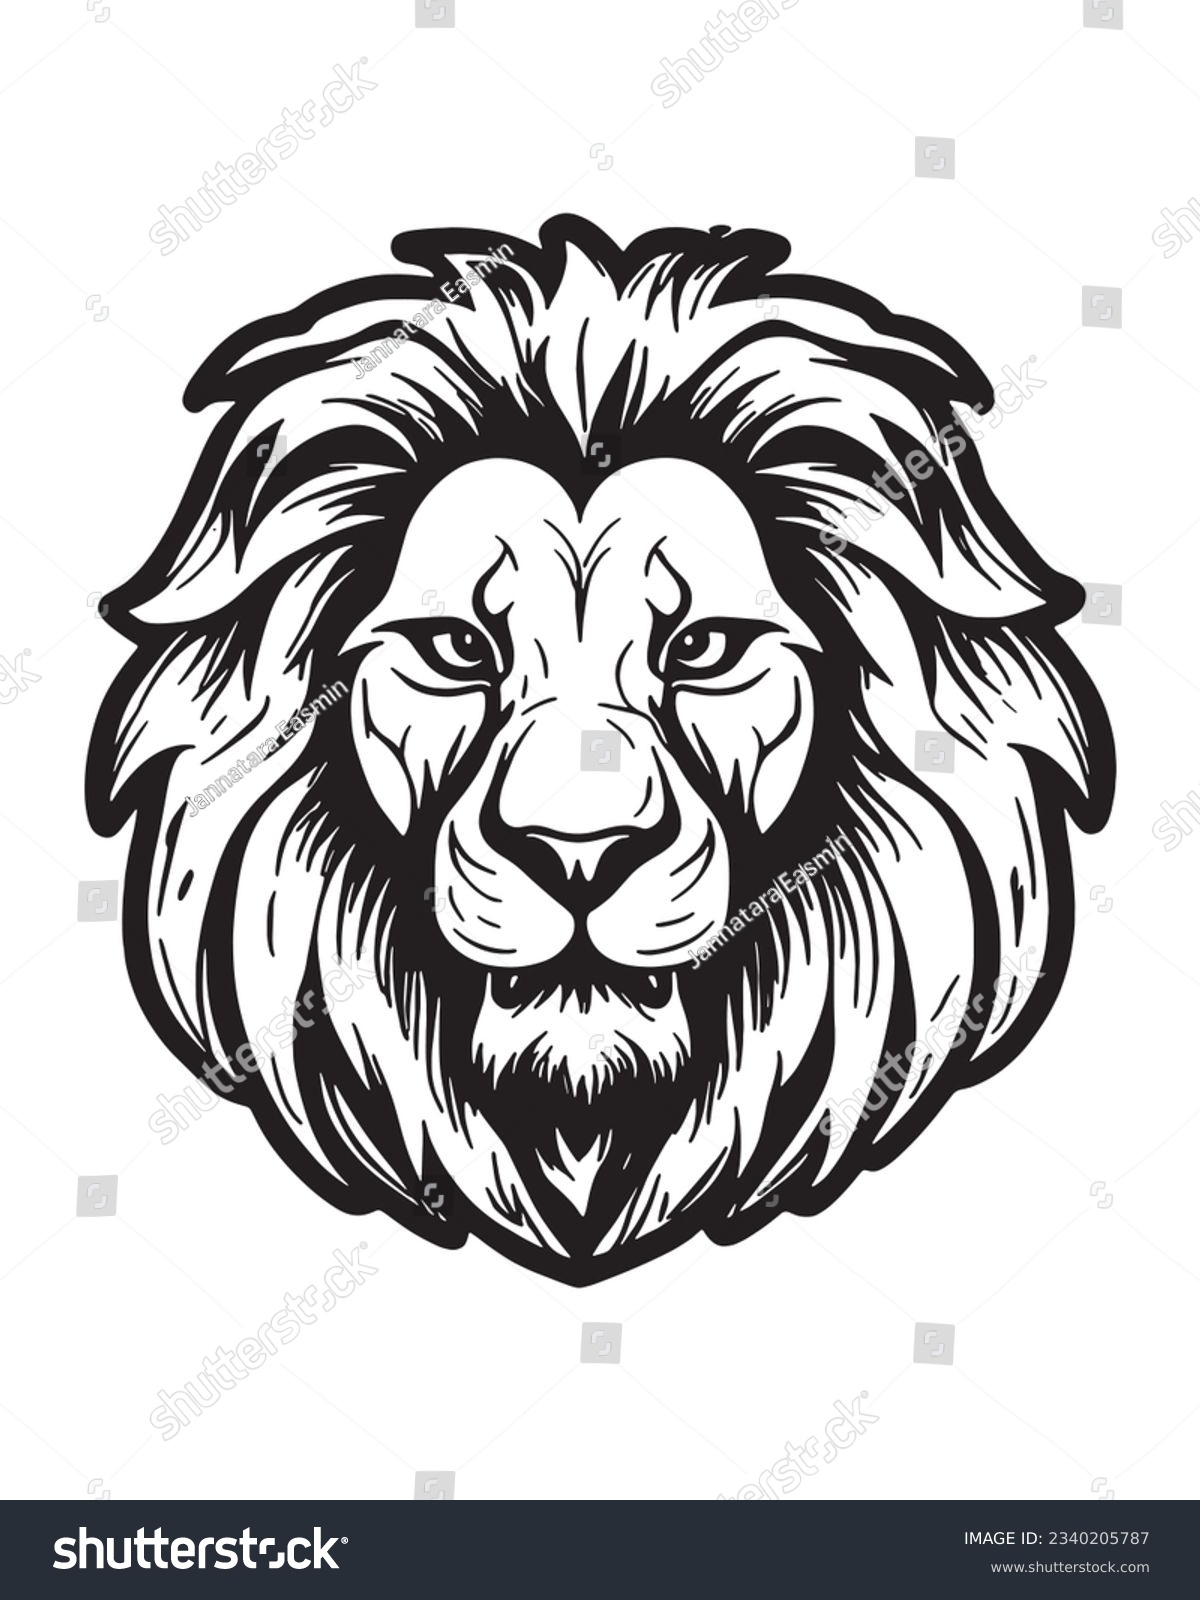 SVG of Lion head logo icon, lion face vector Illustration, on a isolated background, SVG svg